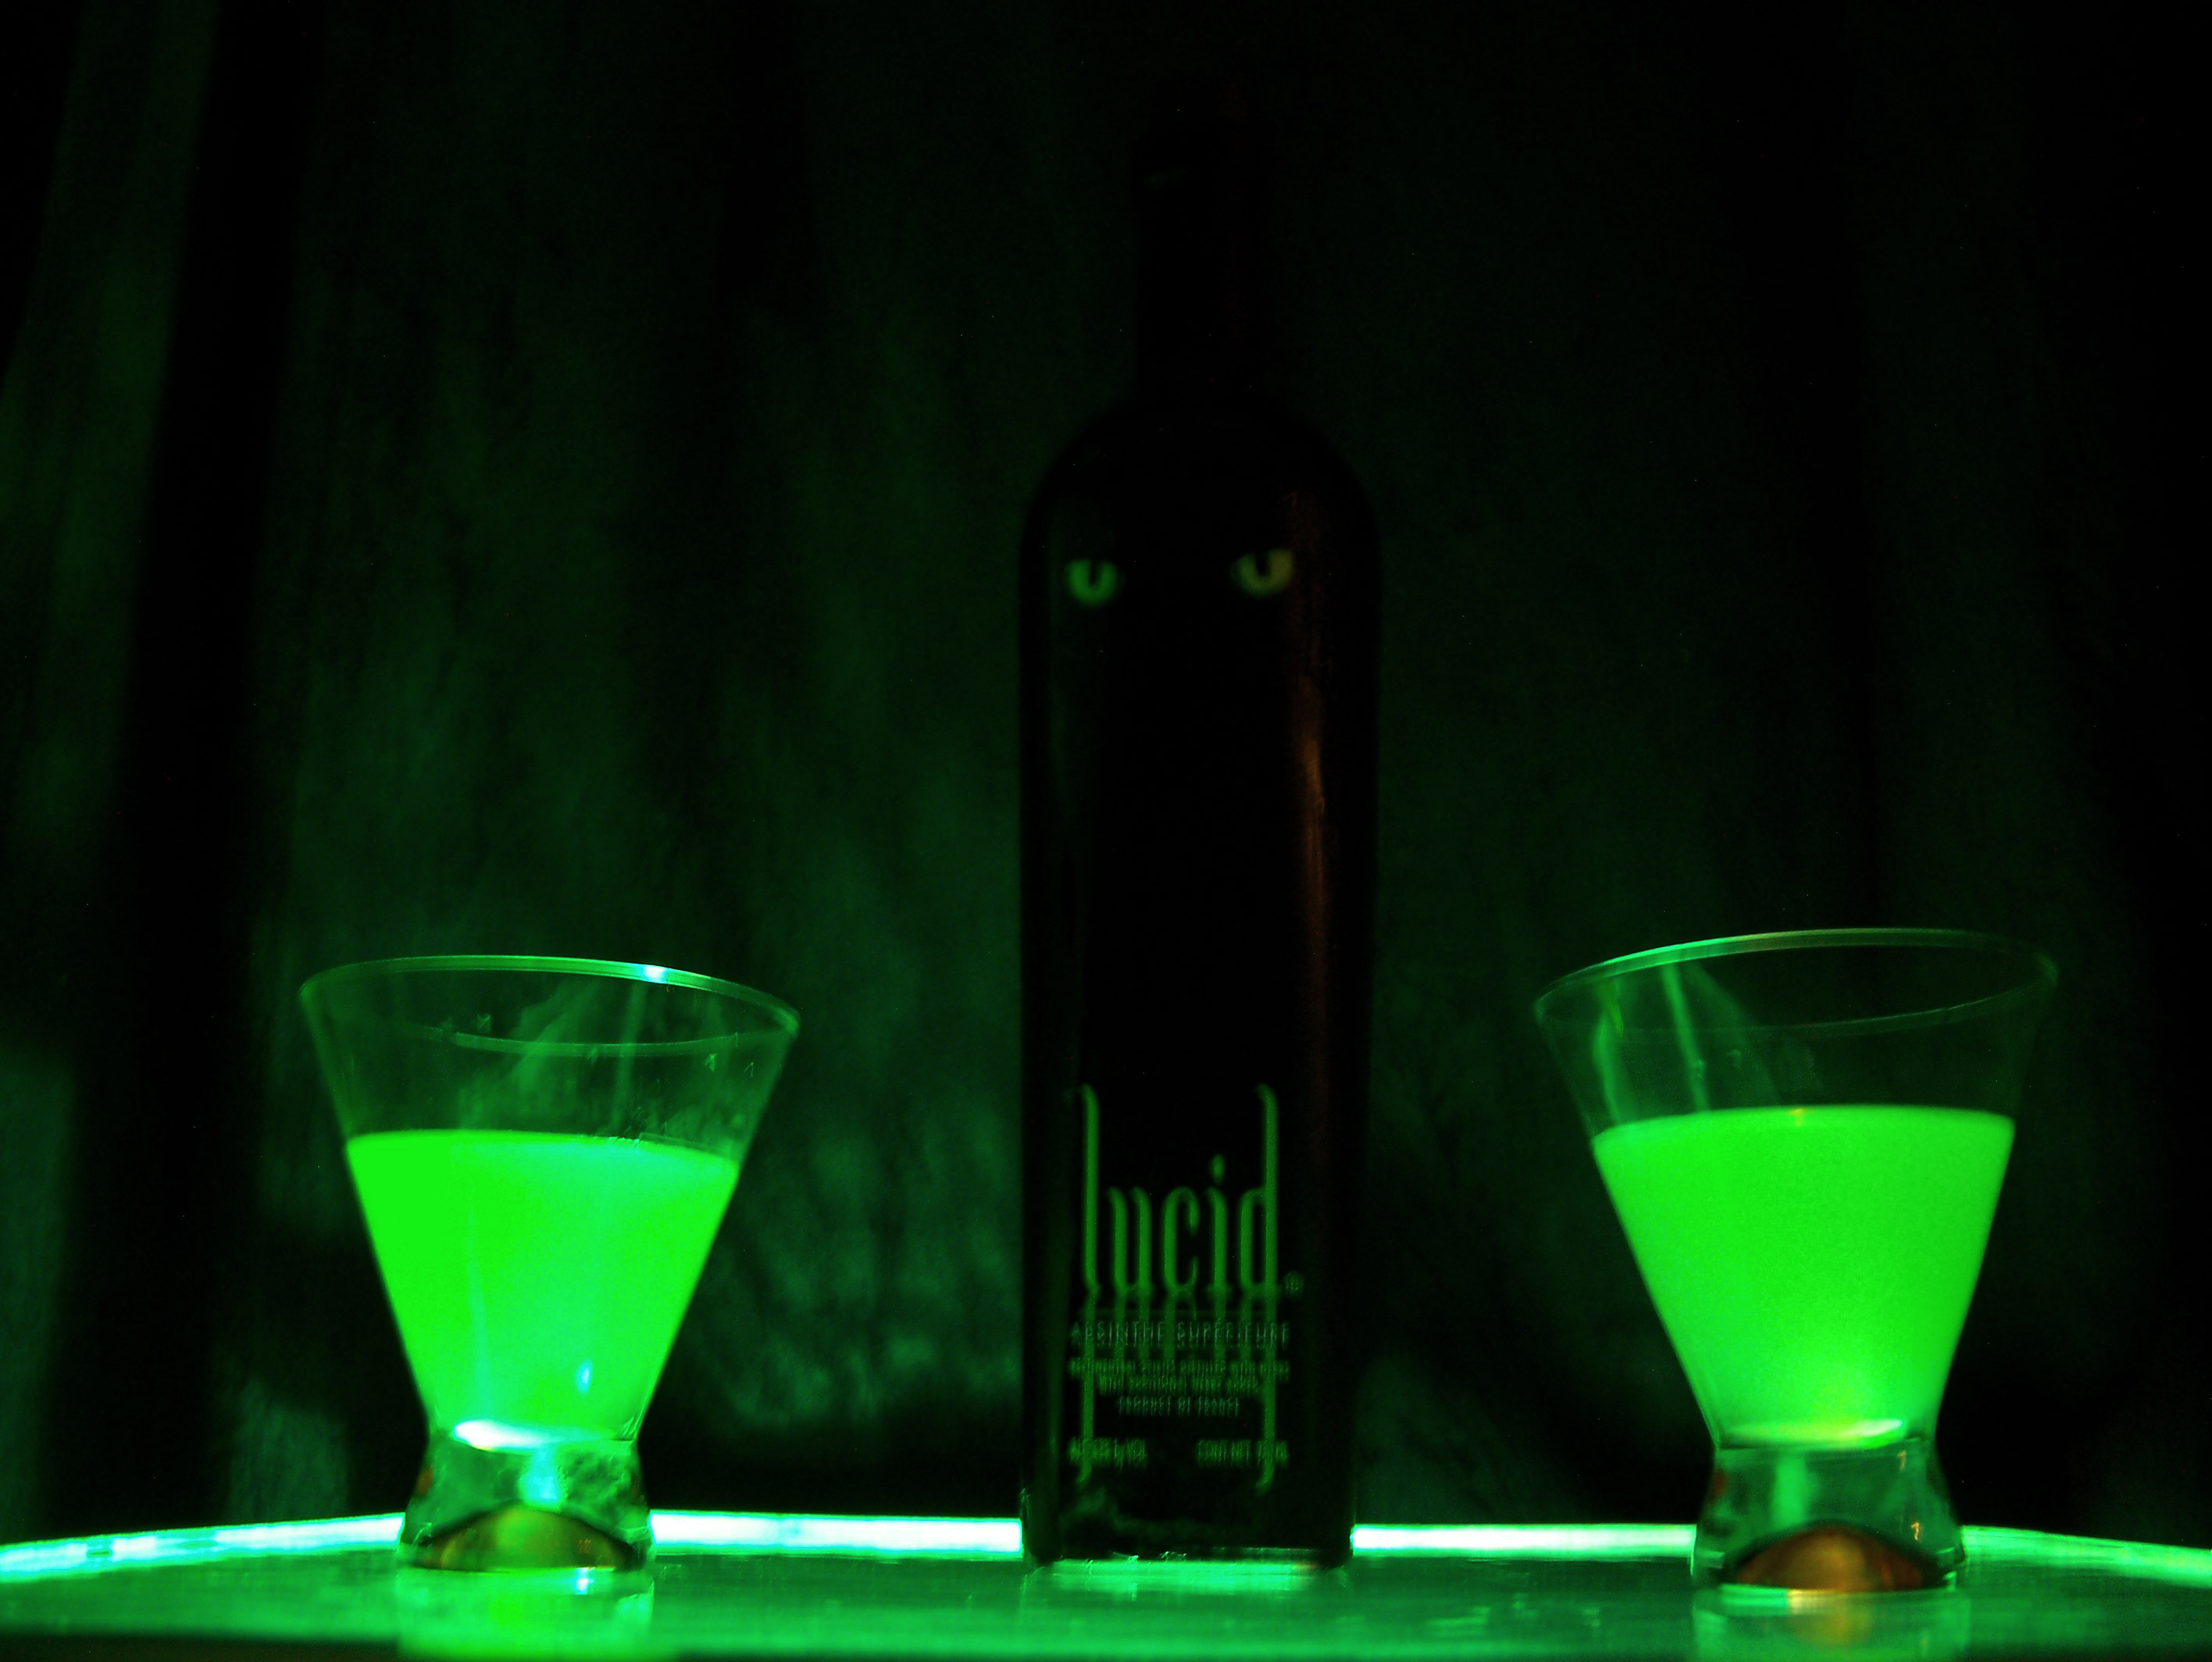 Certain classes of absinthe were allowed into the U.S. in 1997, when the FDA ruled that imported containers of the drink are legal if they contain less than 100 parts per million of thujone, a toxic chemical present in wormwood.